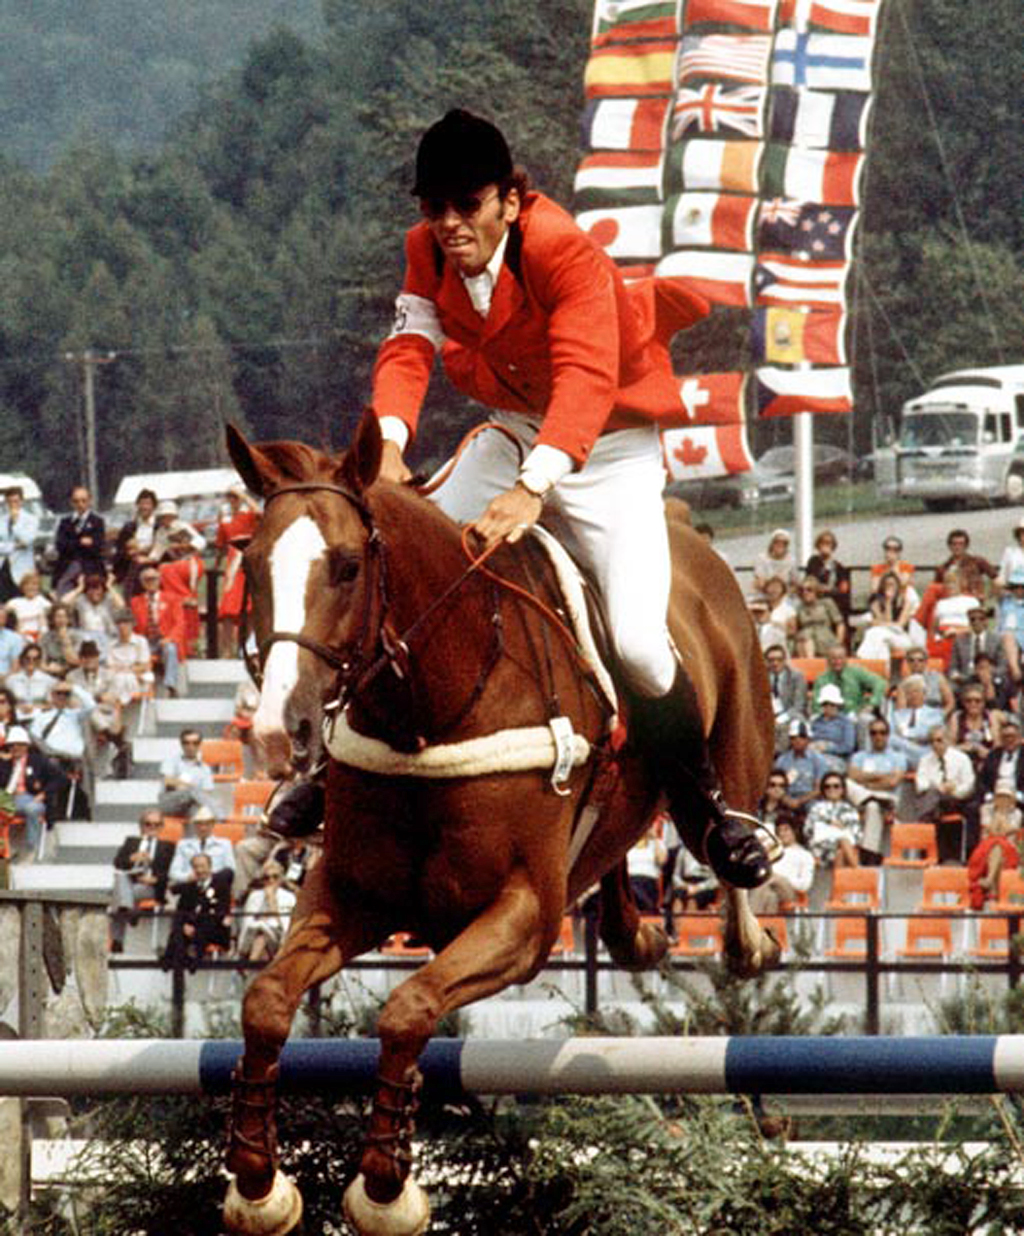 Former racehorse Traffic Judge as Branch County with Michel Vaillancourt aboard winning a Silver Medal at the 1976 Olympics. 